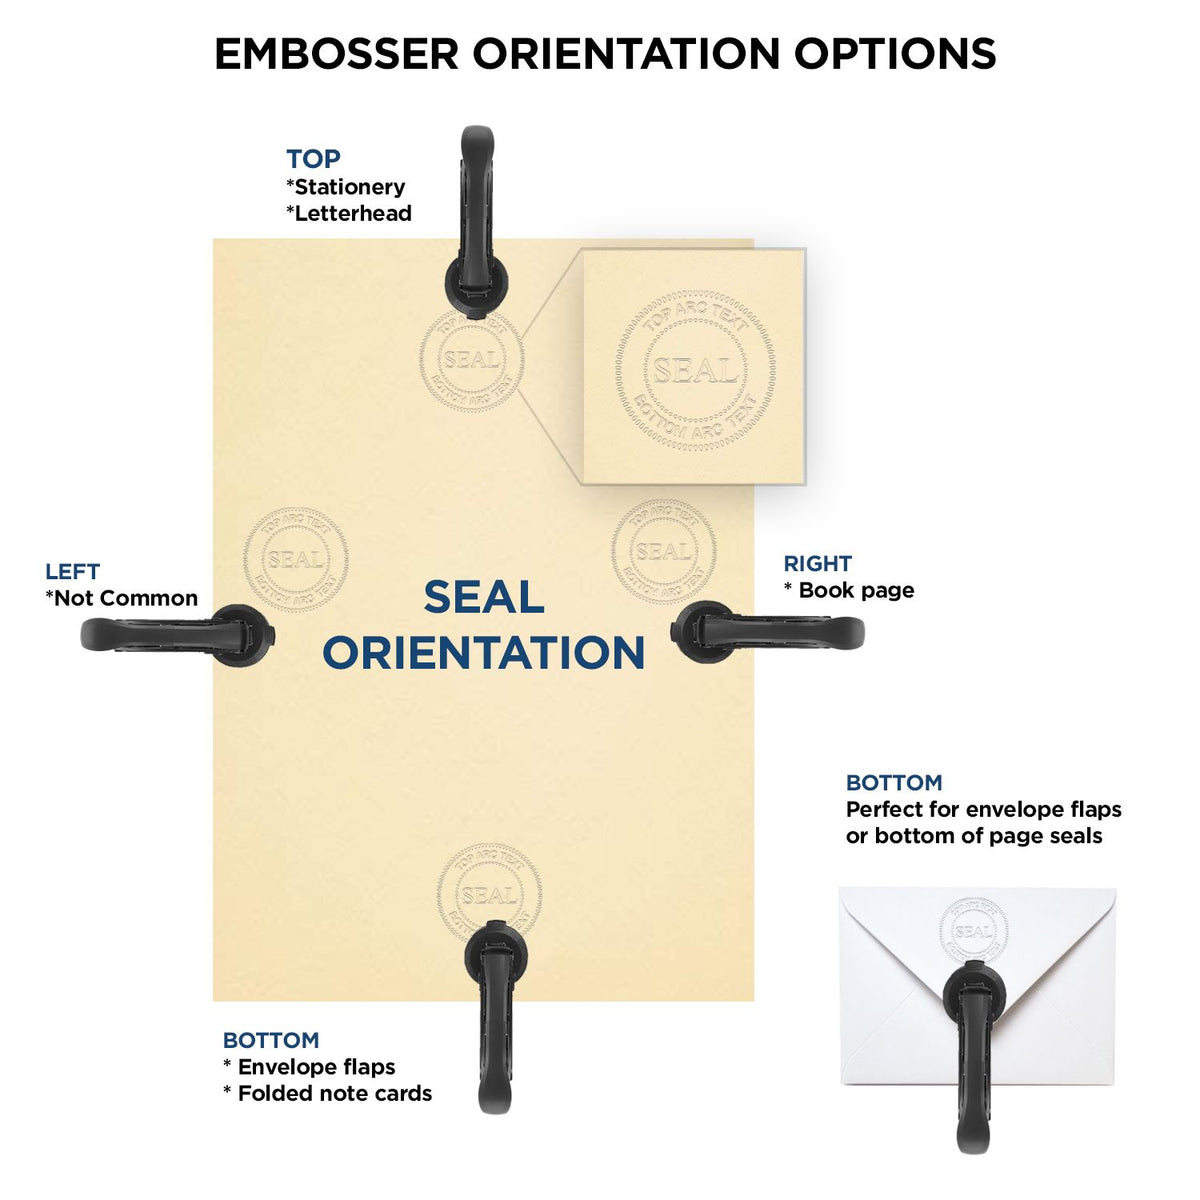 An infographic for the State of California Extended Long Reach Engineer Seal showing embosser orientation, this is showing examples of a top, bottom, right and left insert.